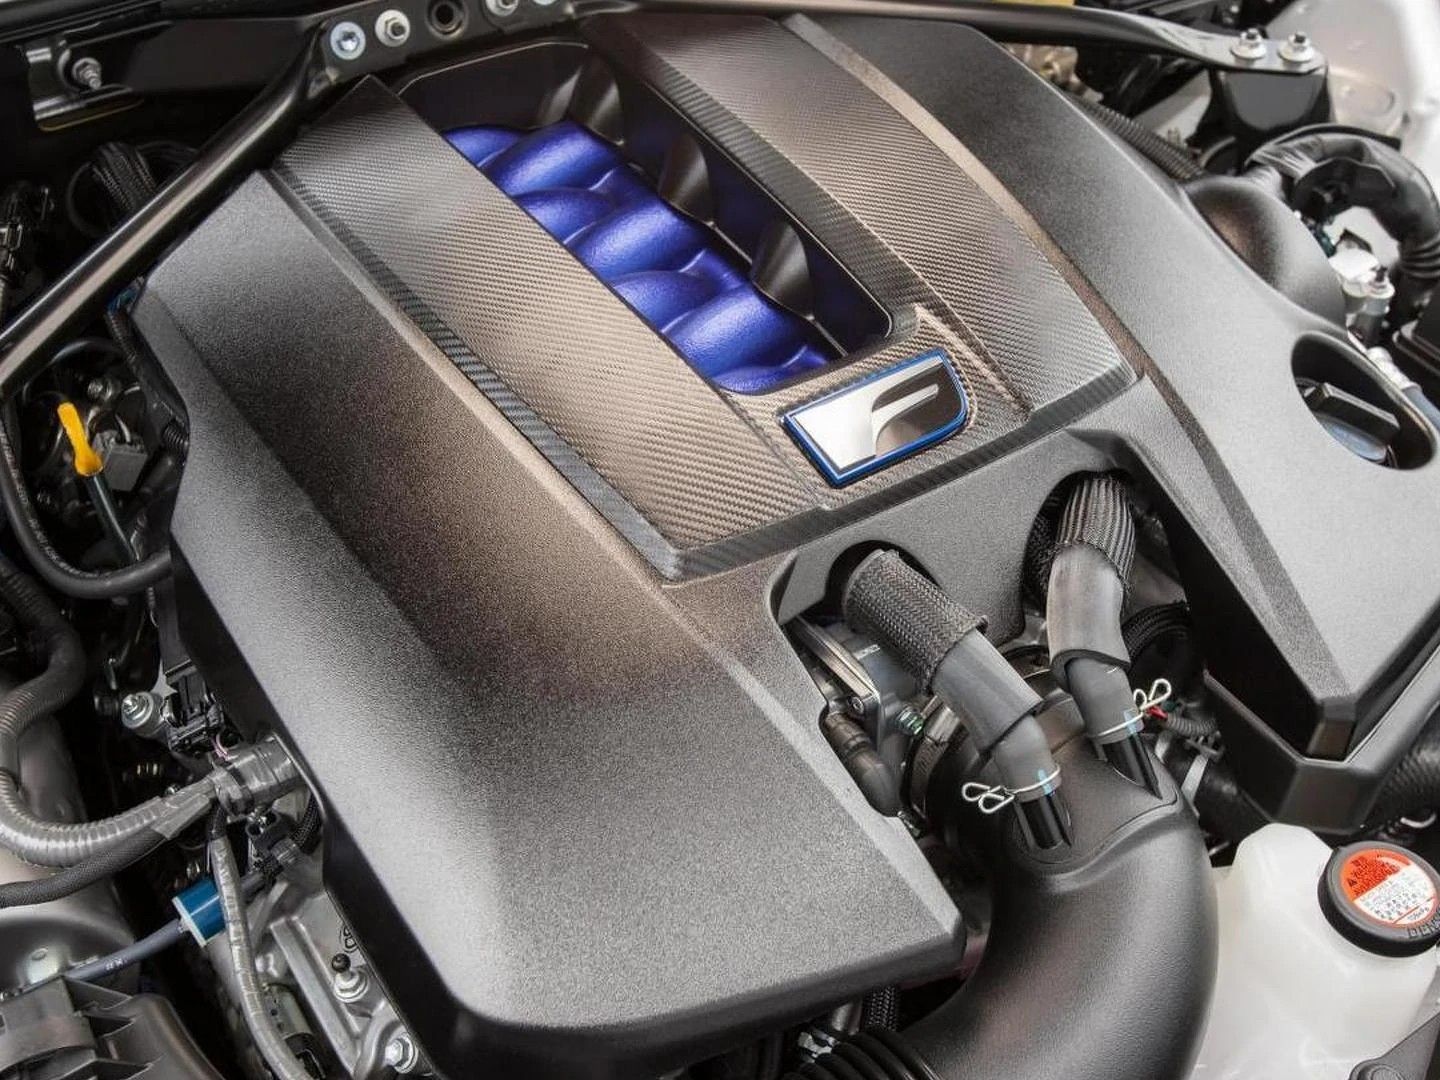 An Image Of The V8 Engine Of The 2022 Lexus RC F Limited Fuji Speedway Edition